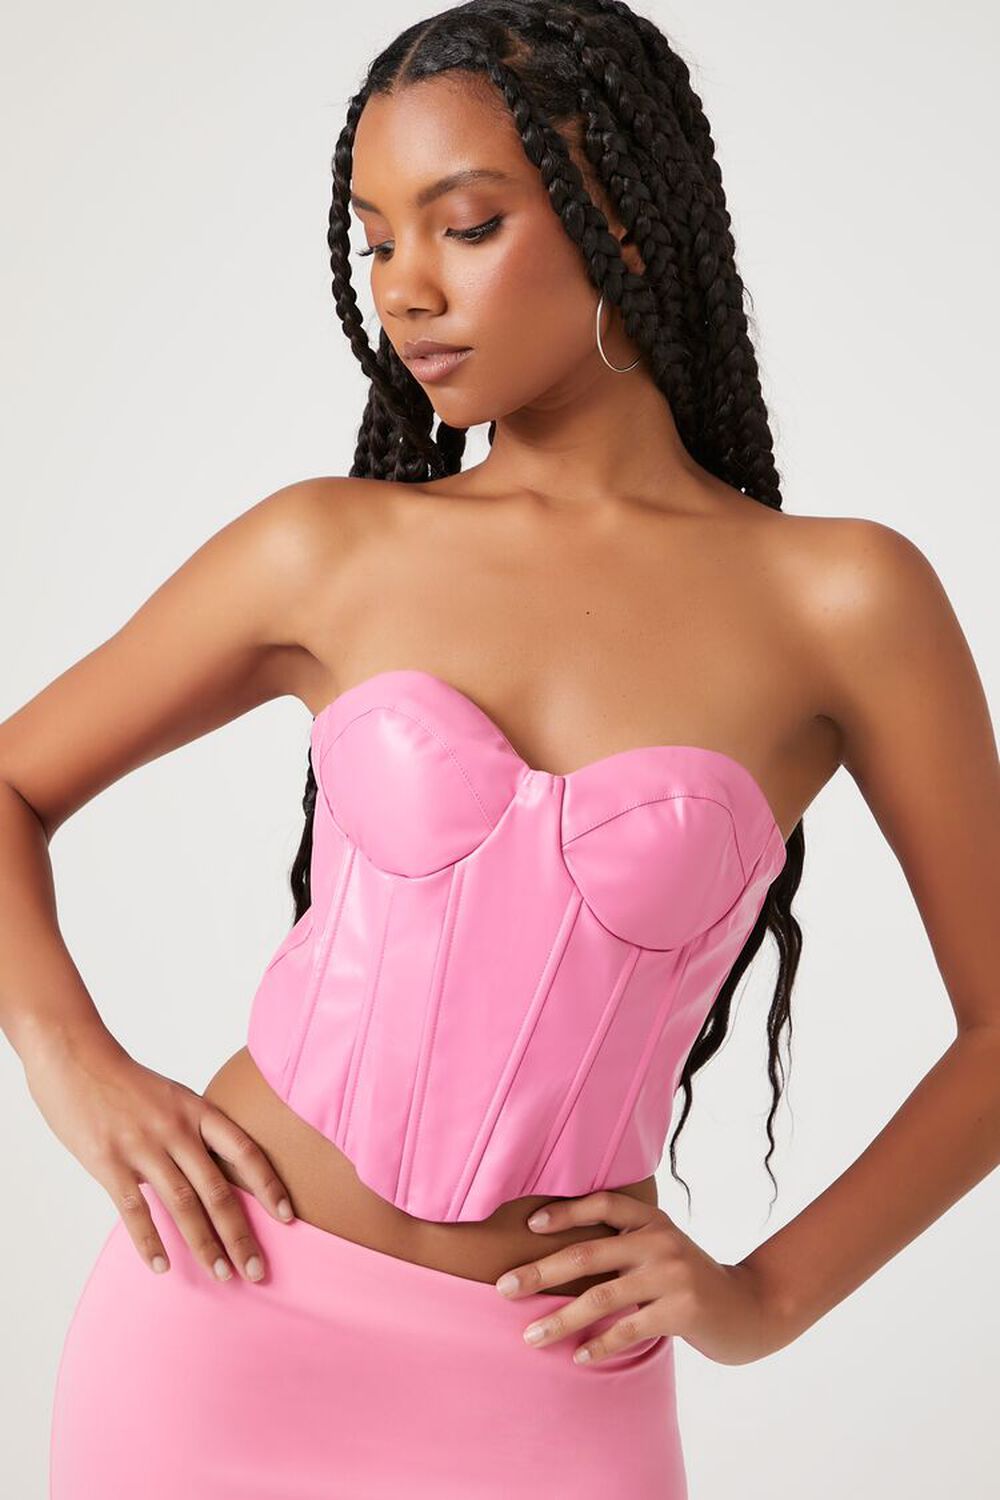 inhzoy Women's Zipper Front PU Leather Bustier Crop Tube Top Pink S